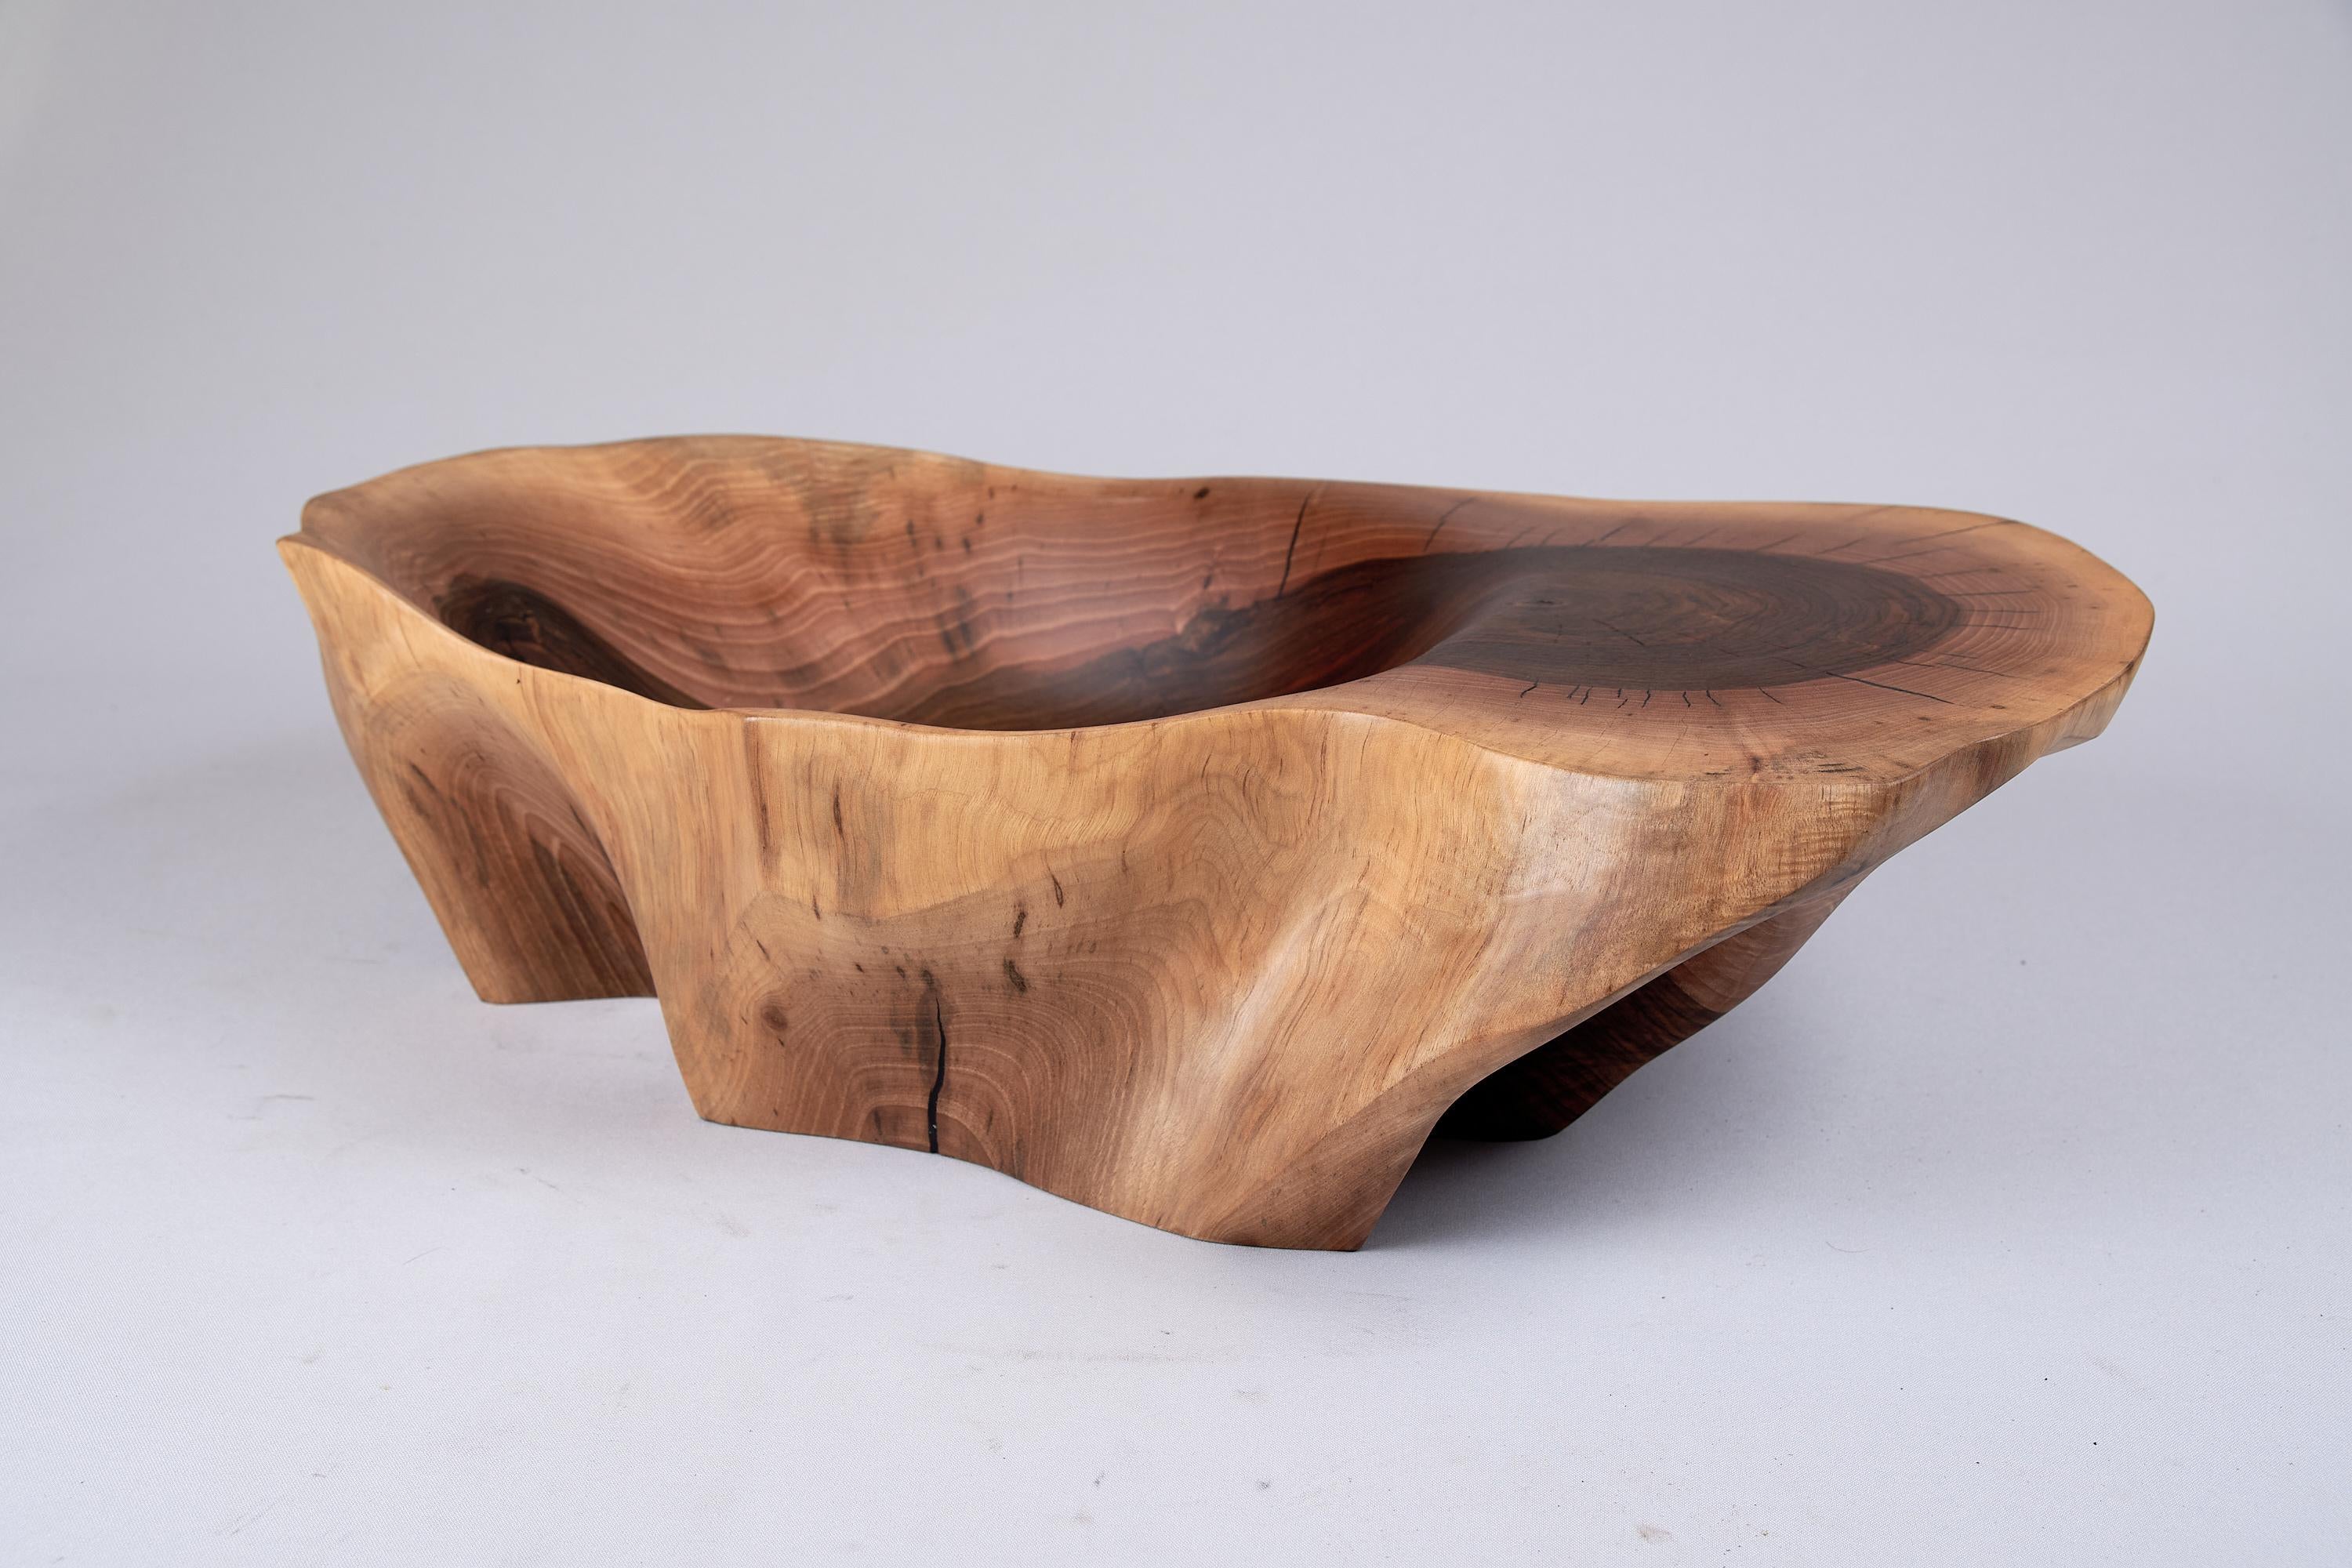 Unique handmade wooden sink carved by artist from single piece of wood with basic carving tools, easy maintaining. Great for any interior, whether it be modern or rustic, it will fit perfectly and leave everyone breathless.

Ready To Be installed